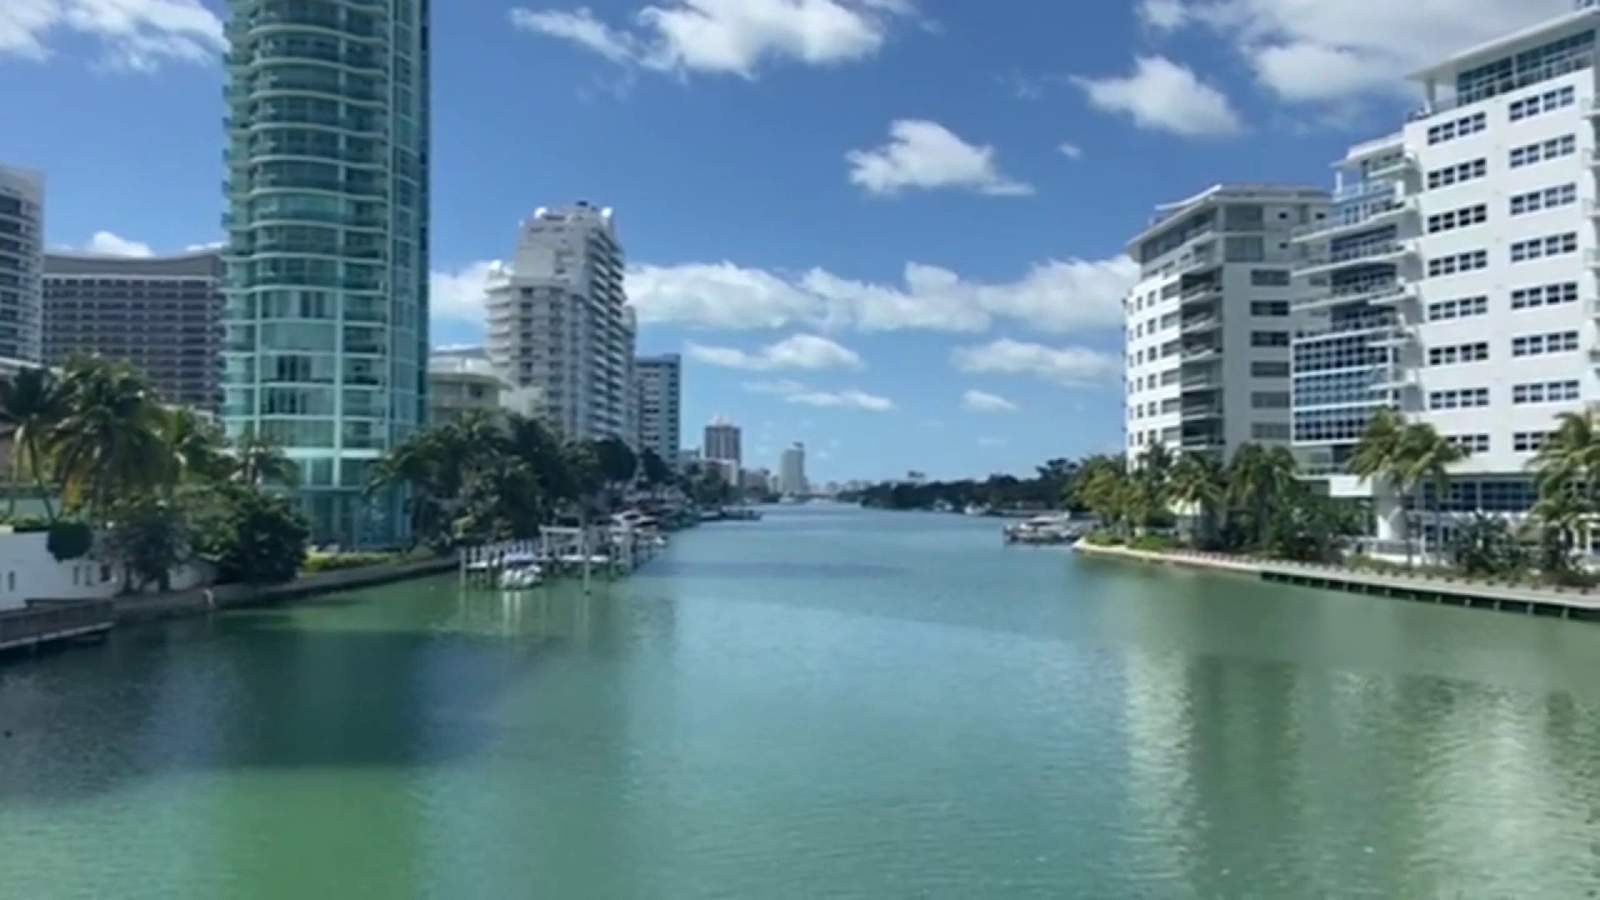 Miami’s water quality has improved during coronavirus pandemic, researcher says - WPLG Local 10